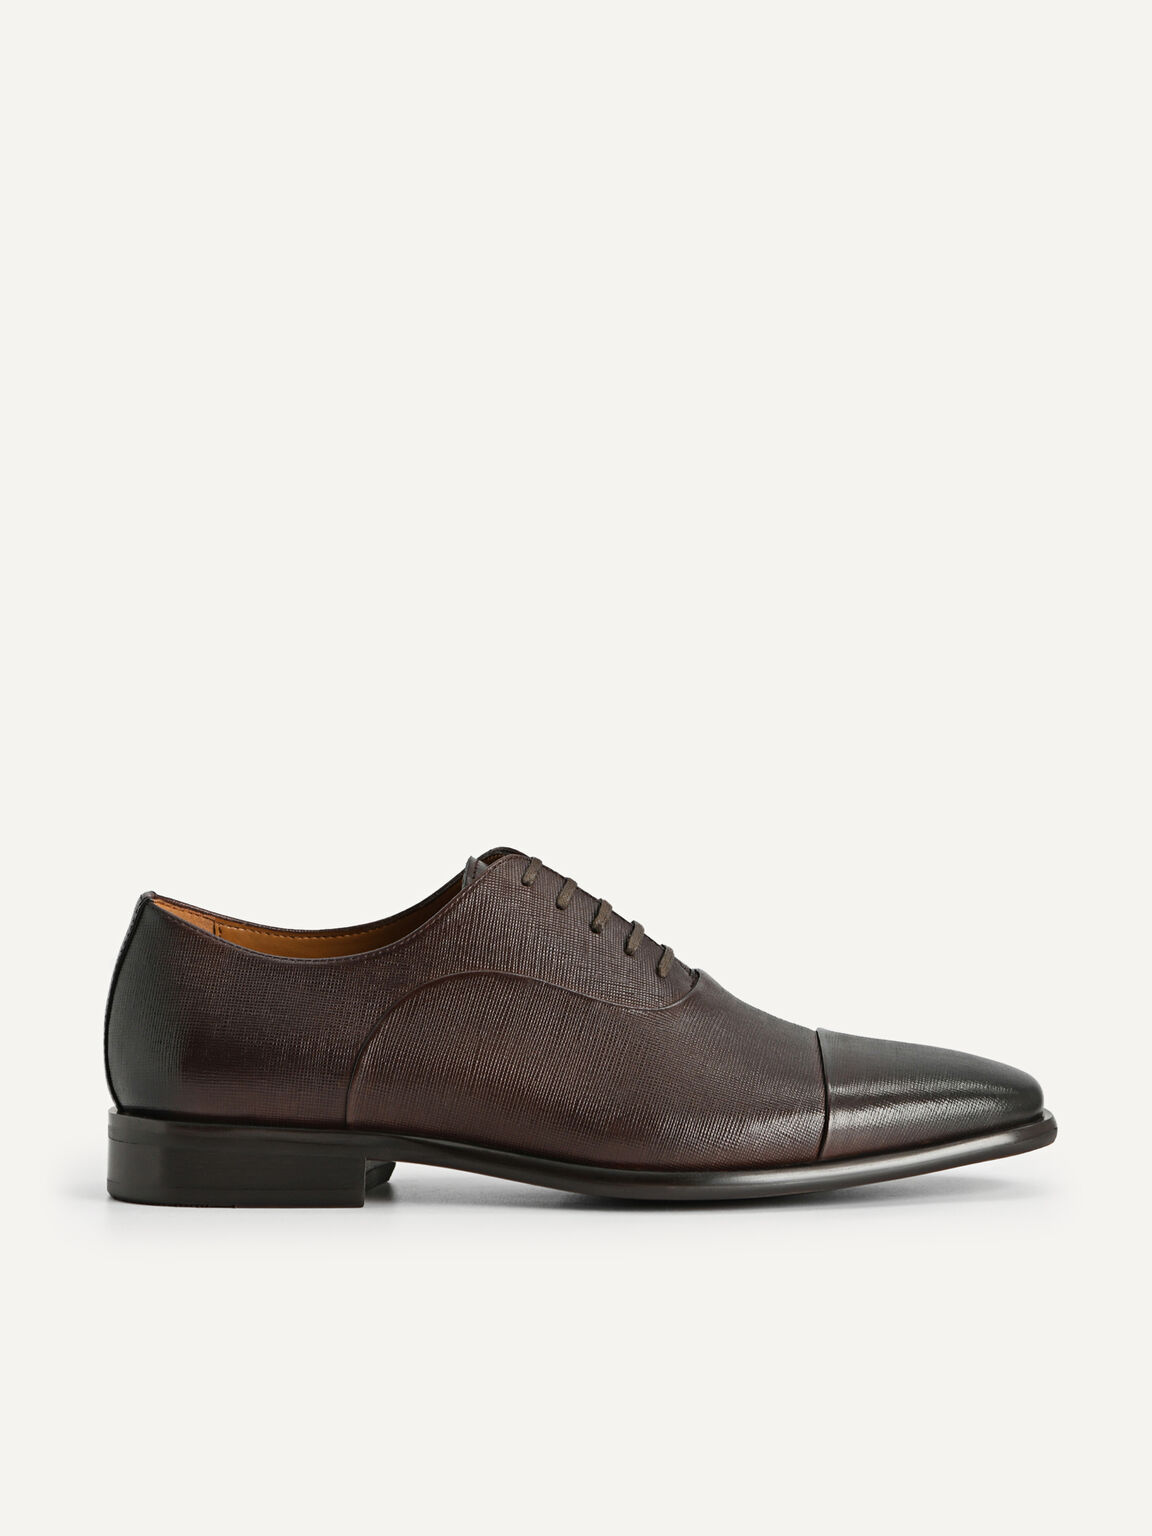 All Leather Oxford Shoes | lupon.gov.ph